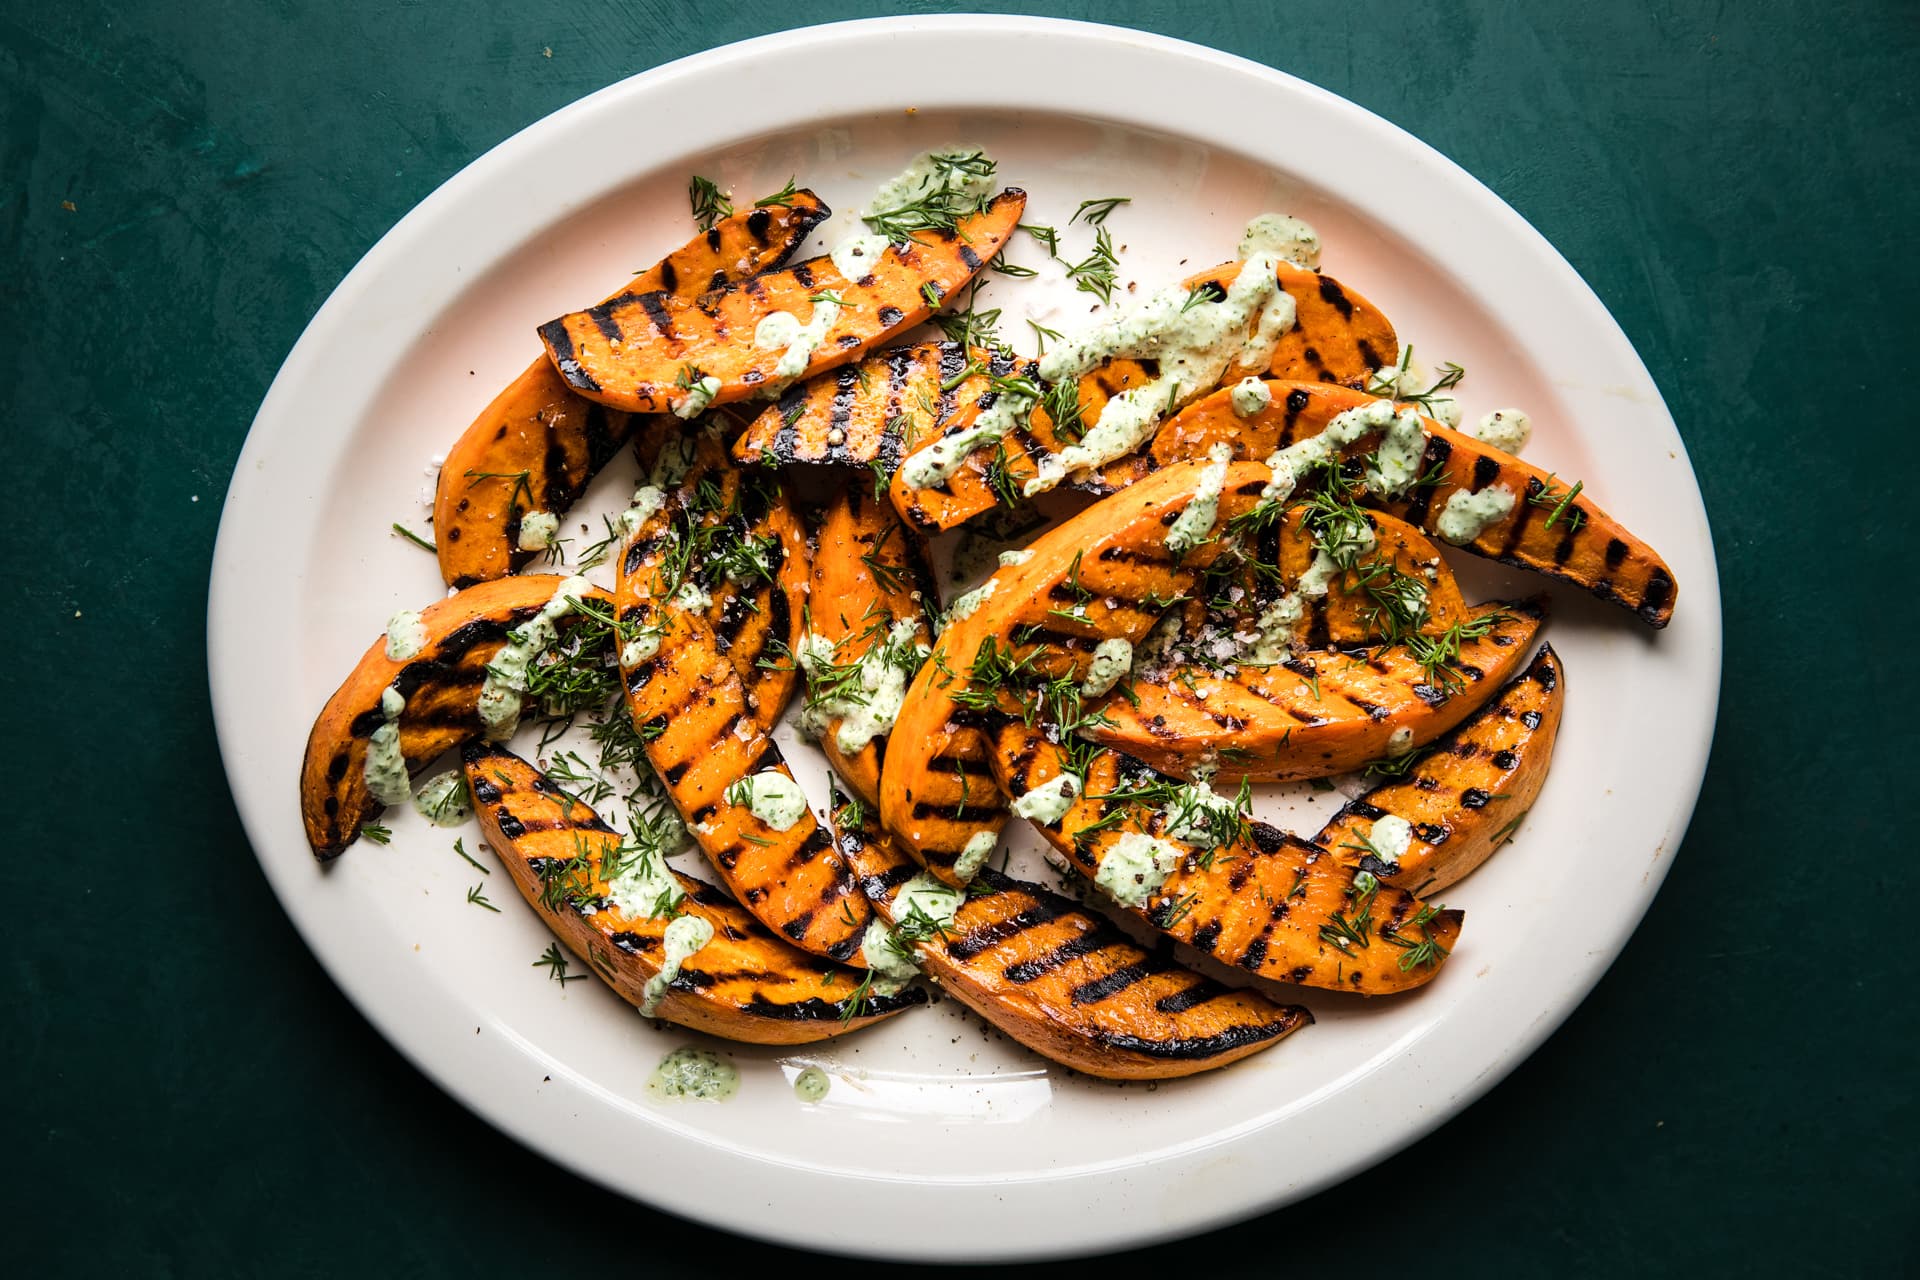 Grilled Sweet potatoes with olive oil and sea salt on a plate drizzled with a basil & dill yogurt sauce